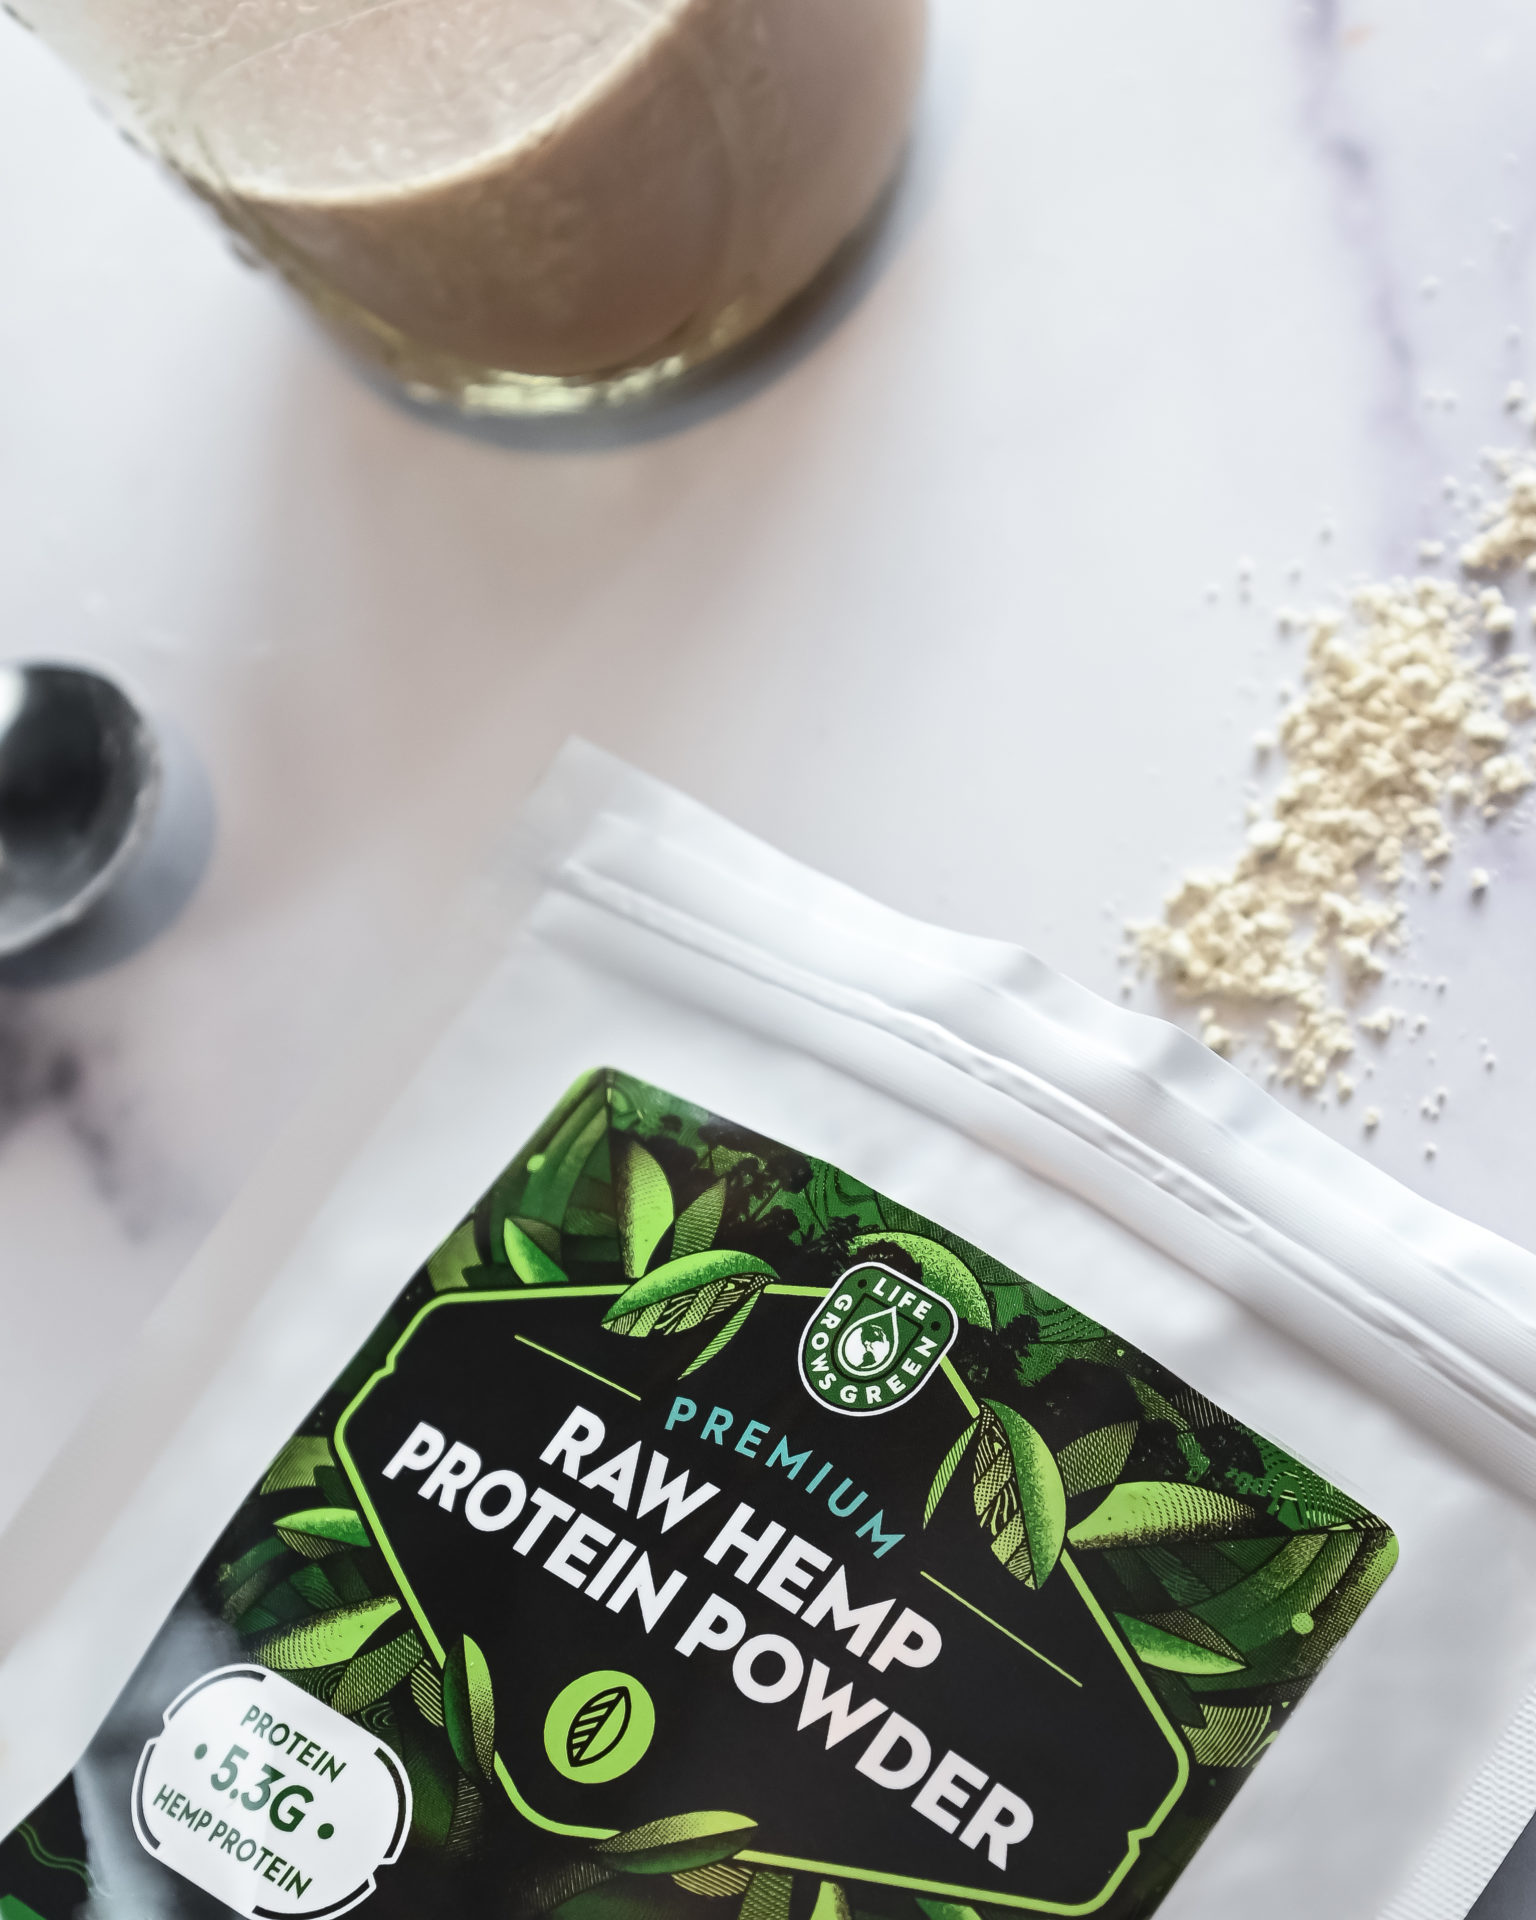 A bag of raw hemp protein powder on a white counter top.